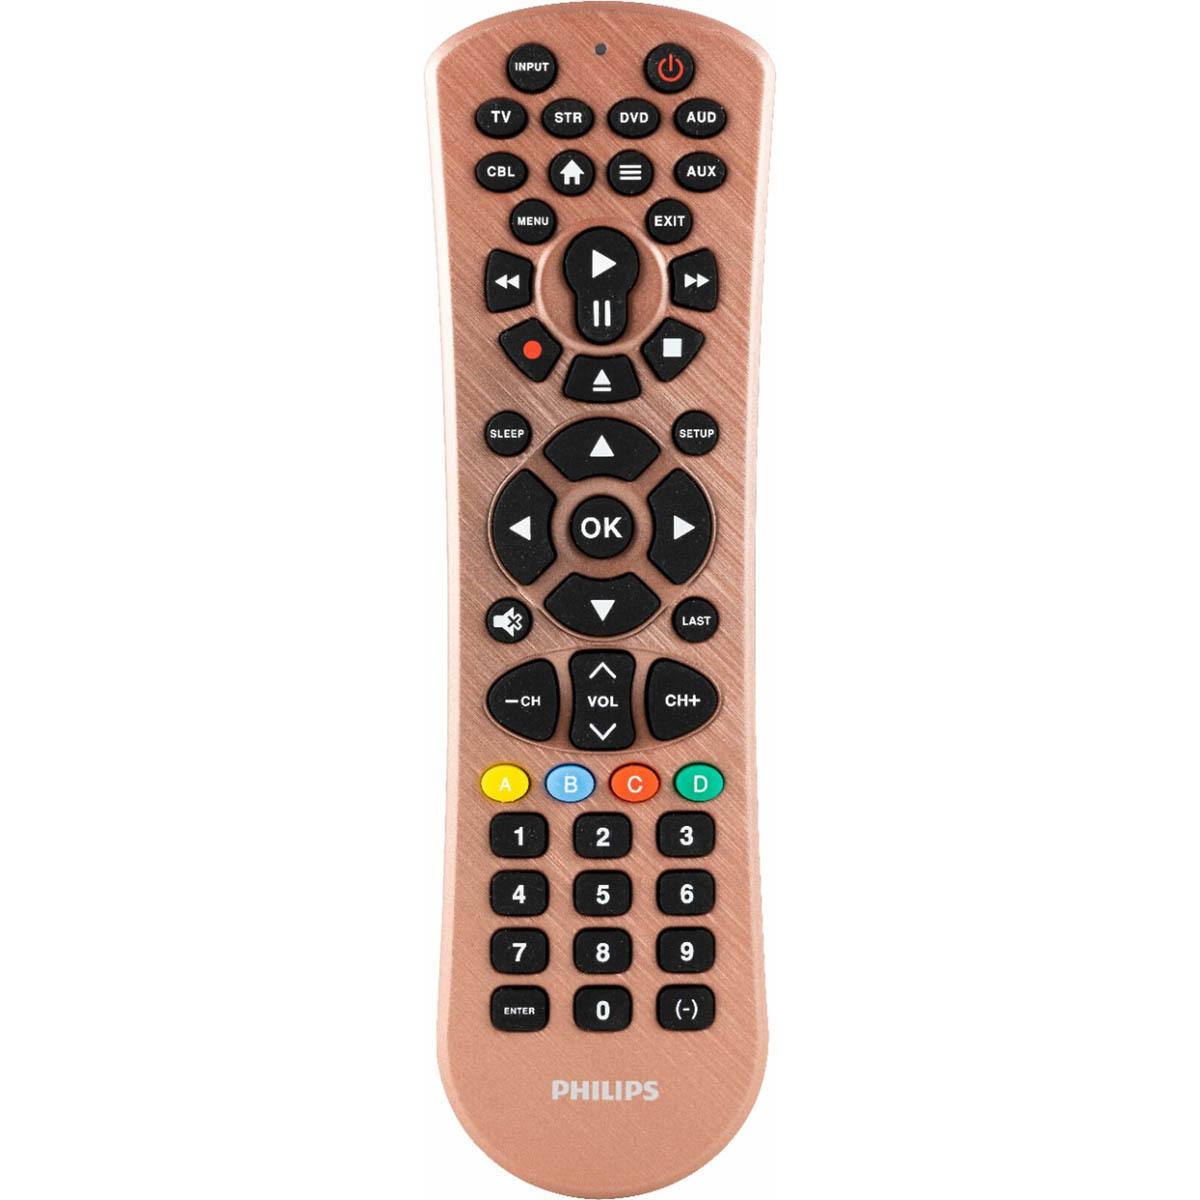 Philips 6-Device TV or DVD or Blu-ray Universal Remote Controller for $5.49 Shipped